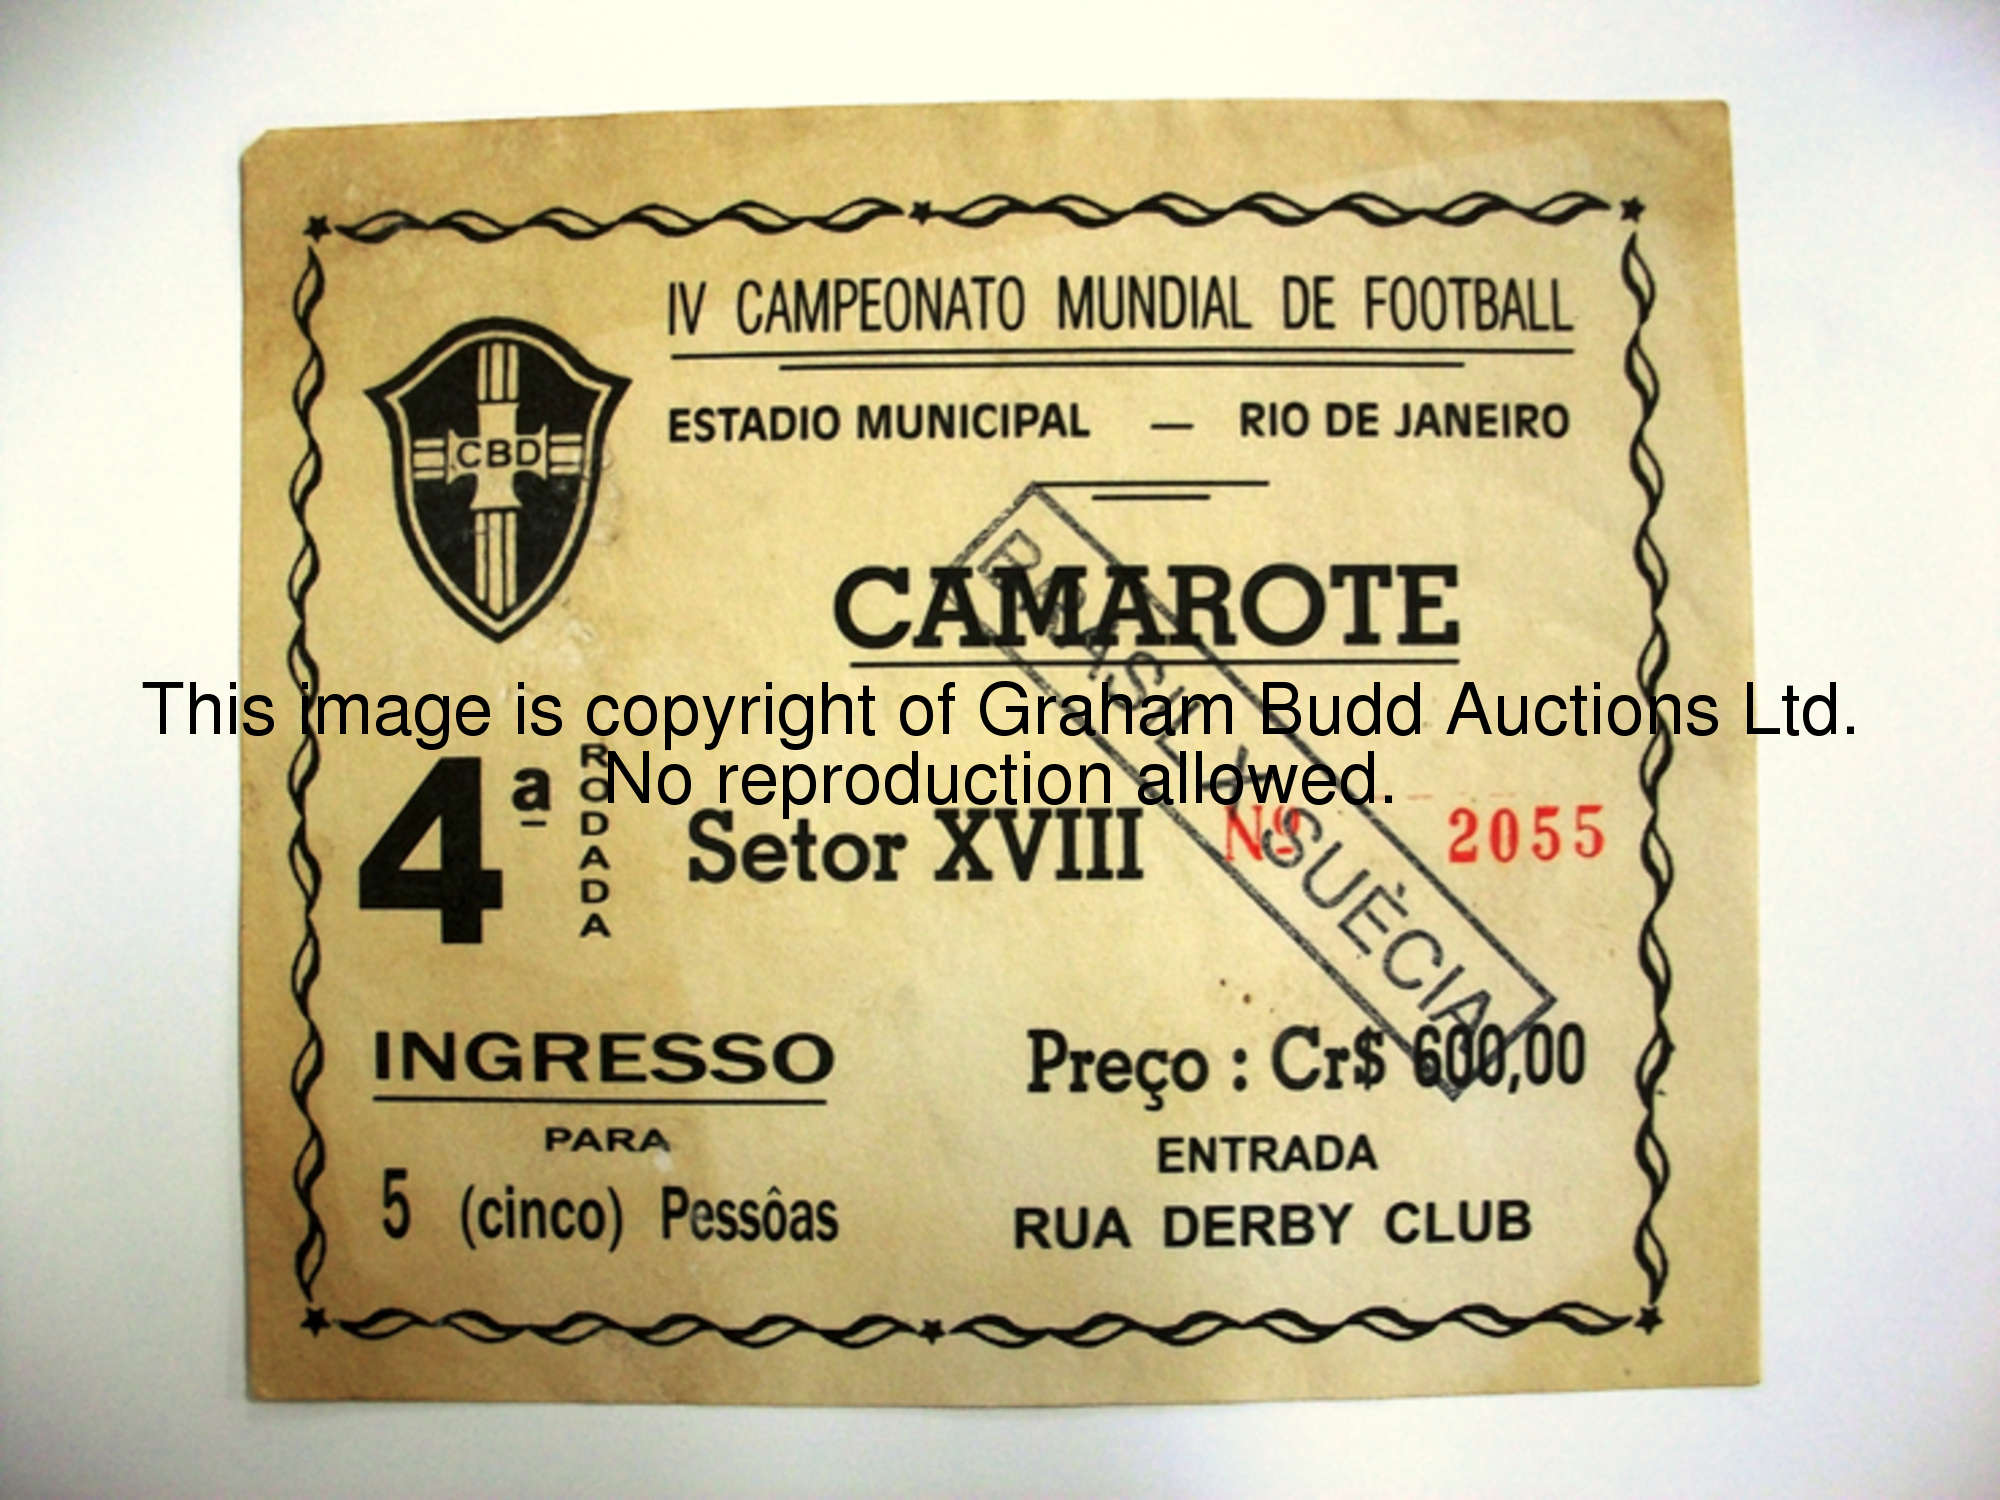 A ticket for the Brazil v Sweden 1950 World Cup Final Round match  played at the Maracana, Rio de Ja...